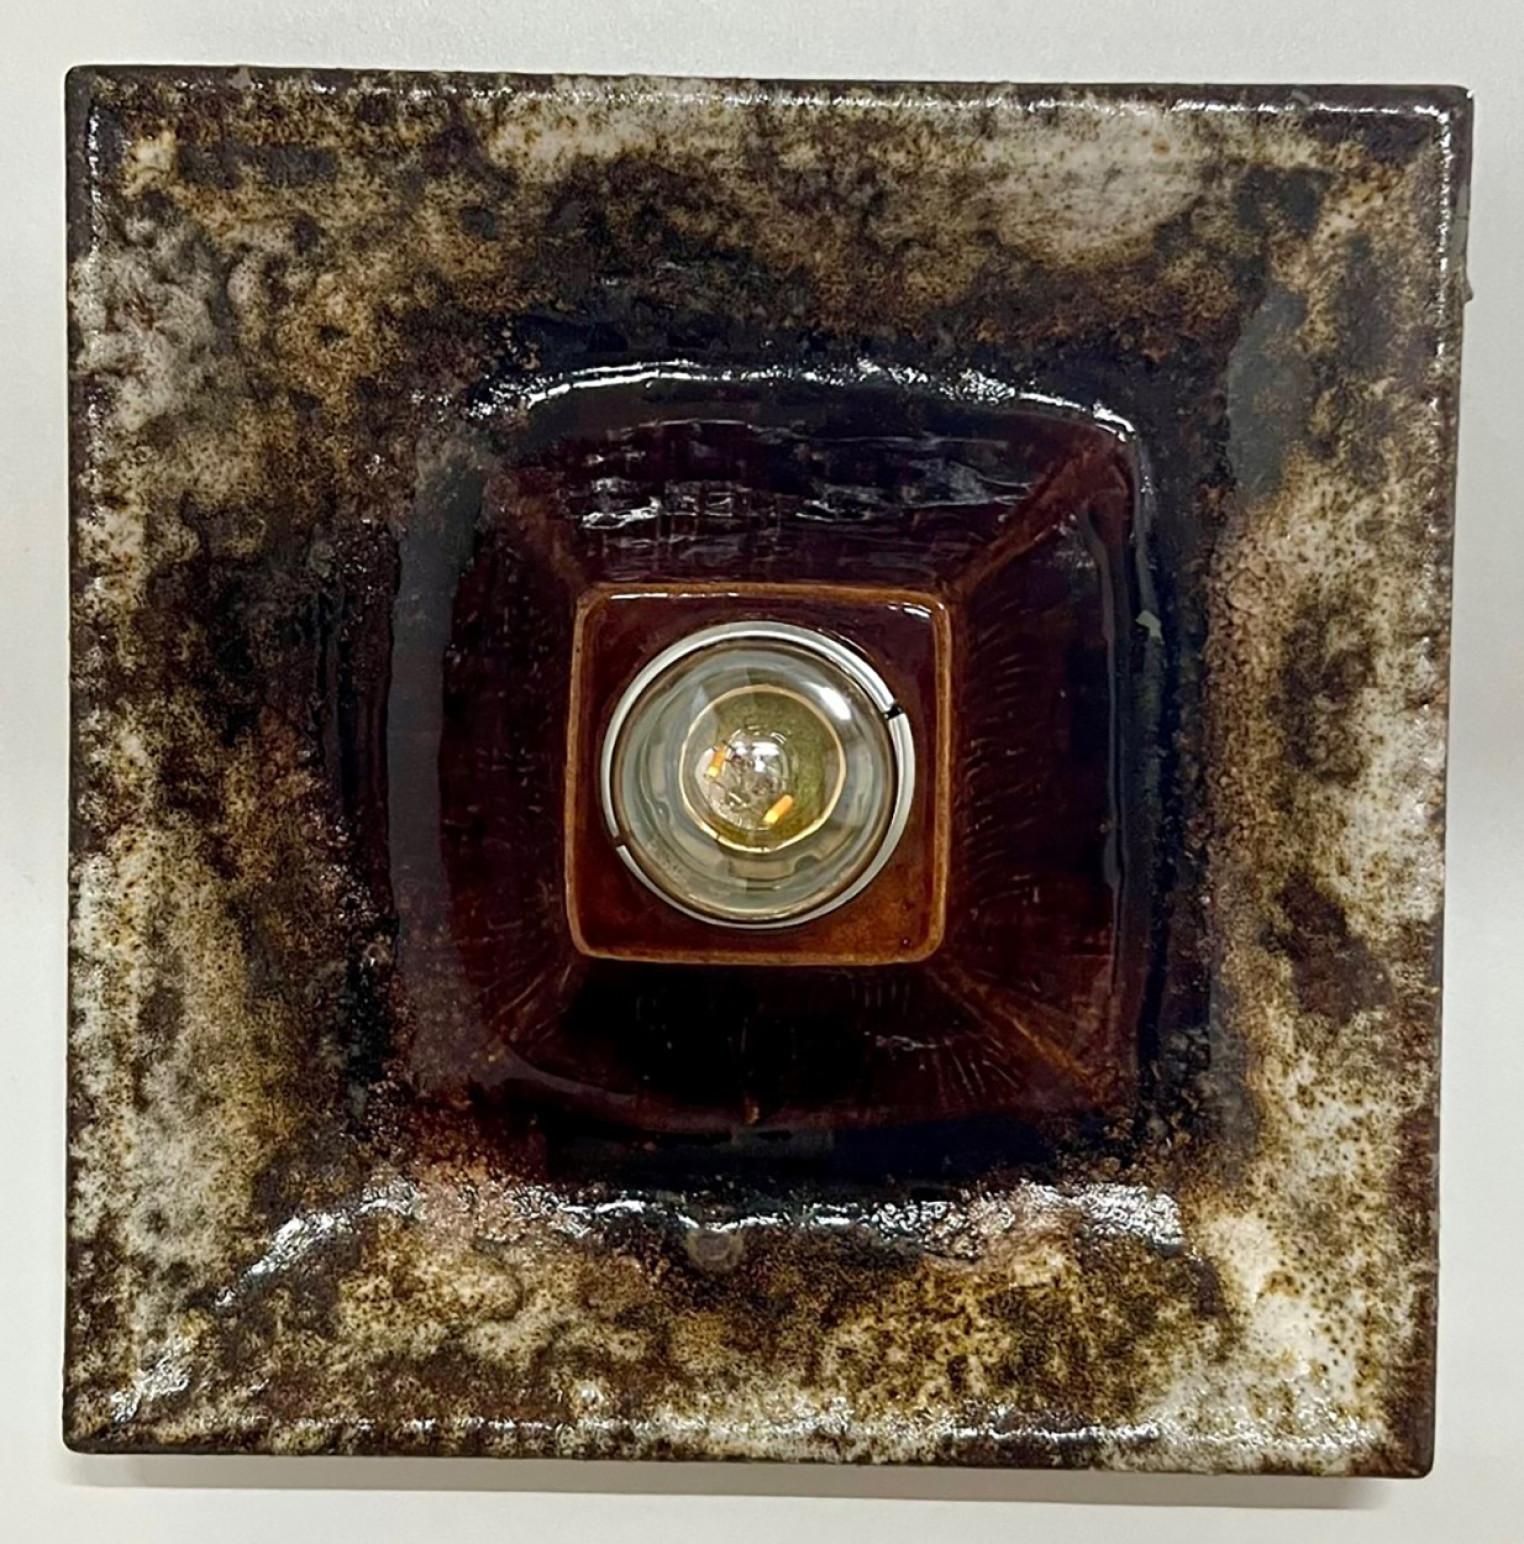 Brown square ceramic wall lights. Manufactured by Hustadt Leuchten Keramik, Germany in the 1970s.

The glaze is in a brown color.

We used gold mirror light bulbs (see images), but silver mirror or soft lights light bulbs are also very